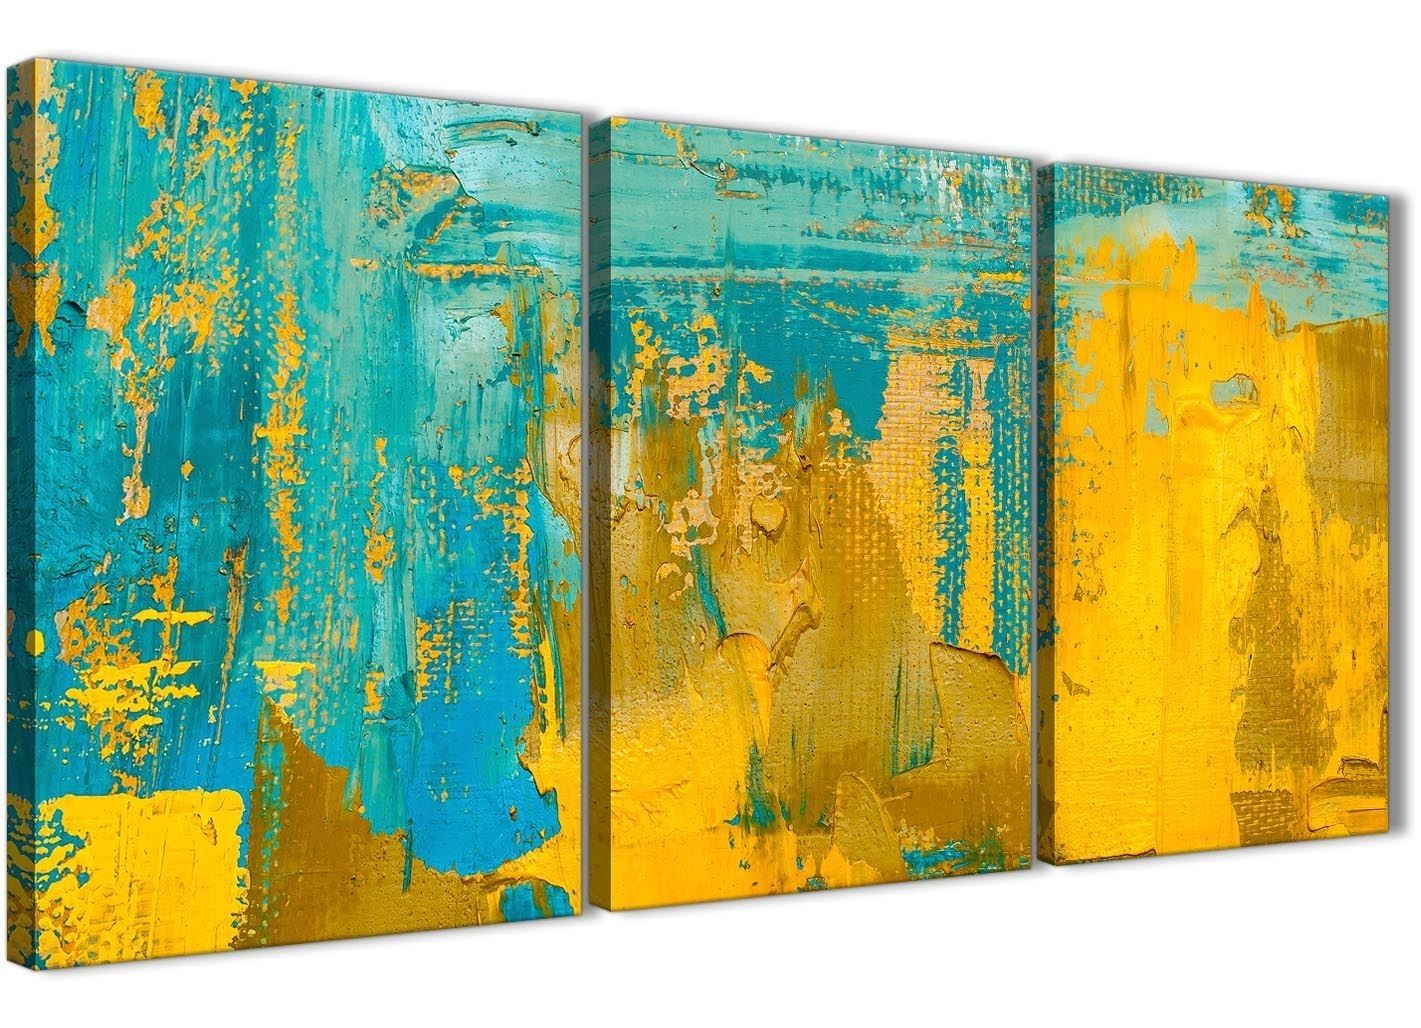 Mustard Yellow And Teal Turquoise – Abstract Dining Room Canvas Wall Within Turquoise Wall Art (View 13 of 20)